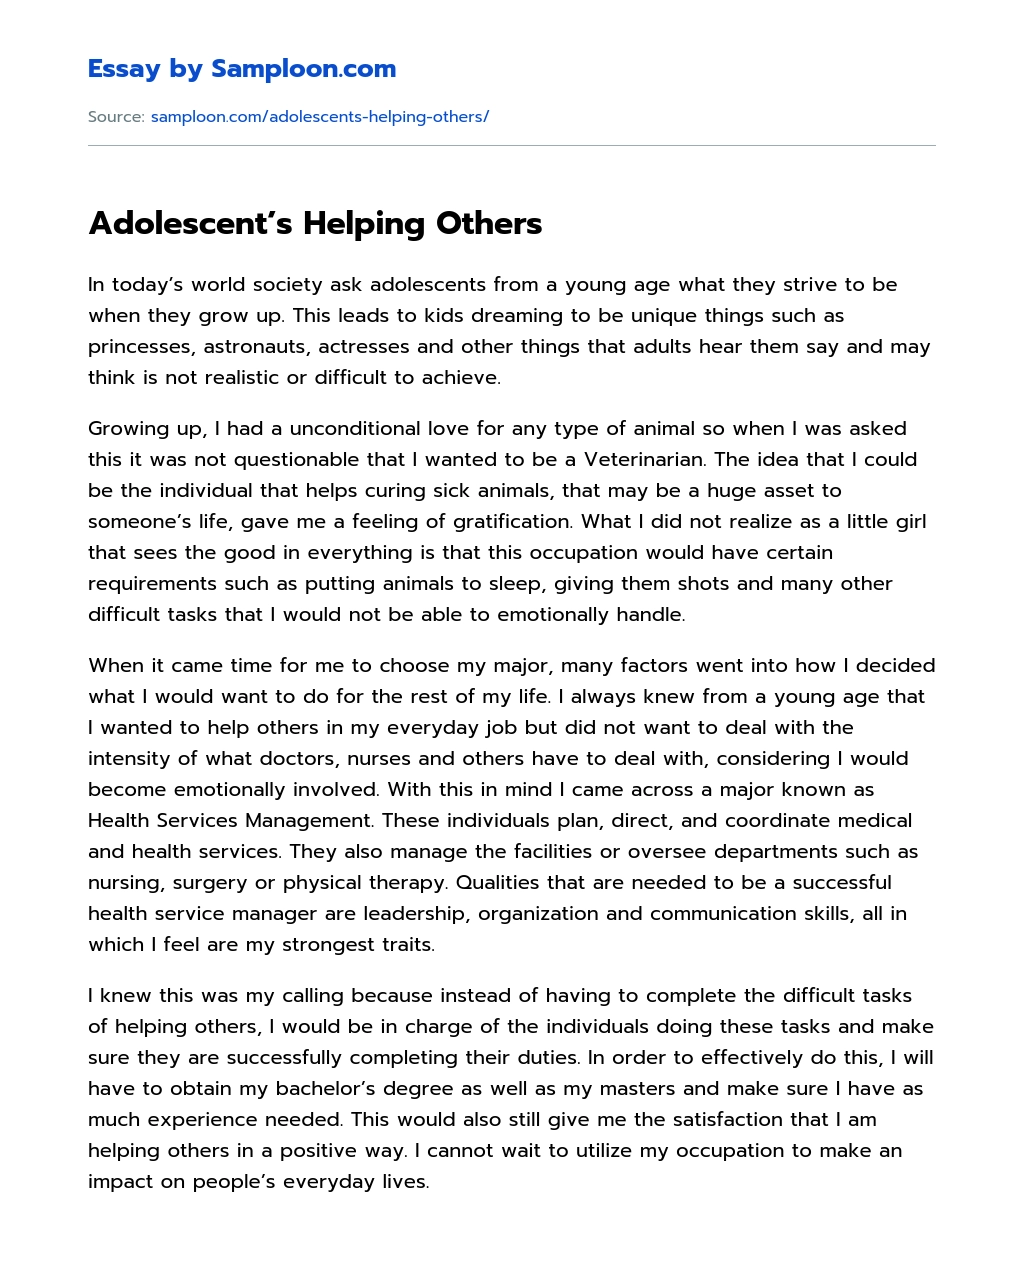 Adolescent’s Helping Others essay